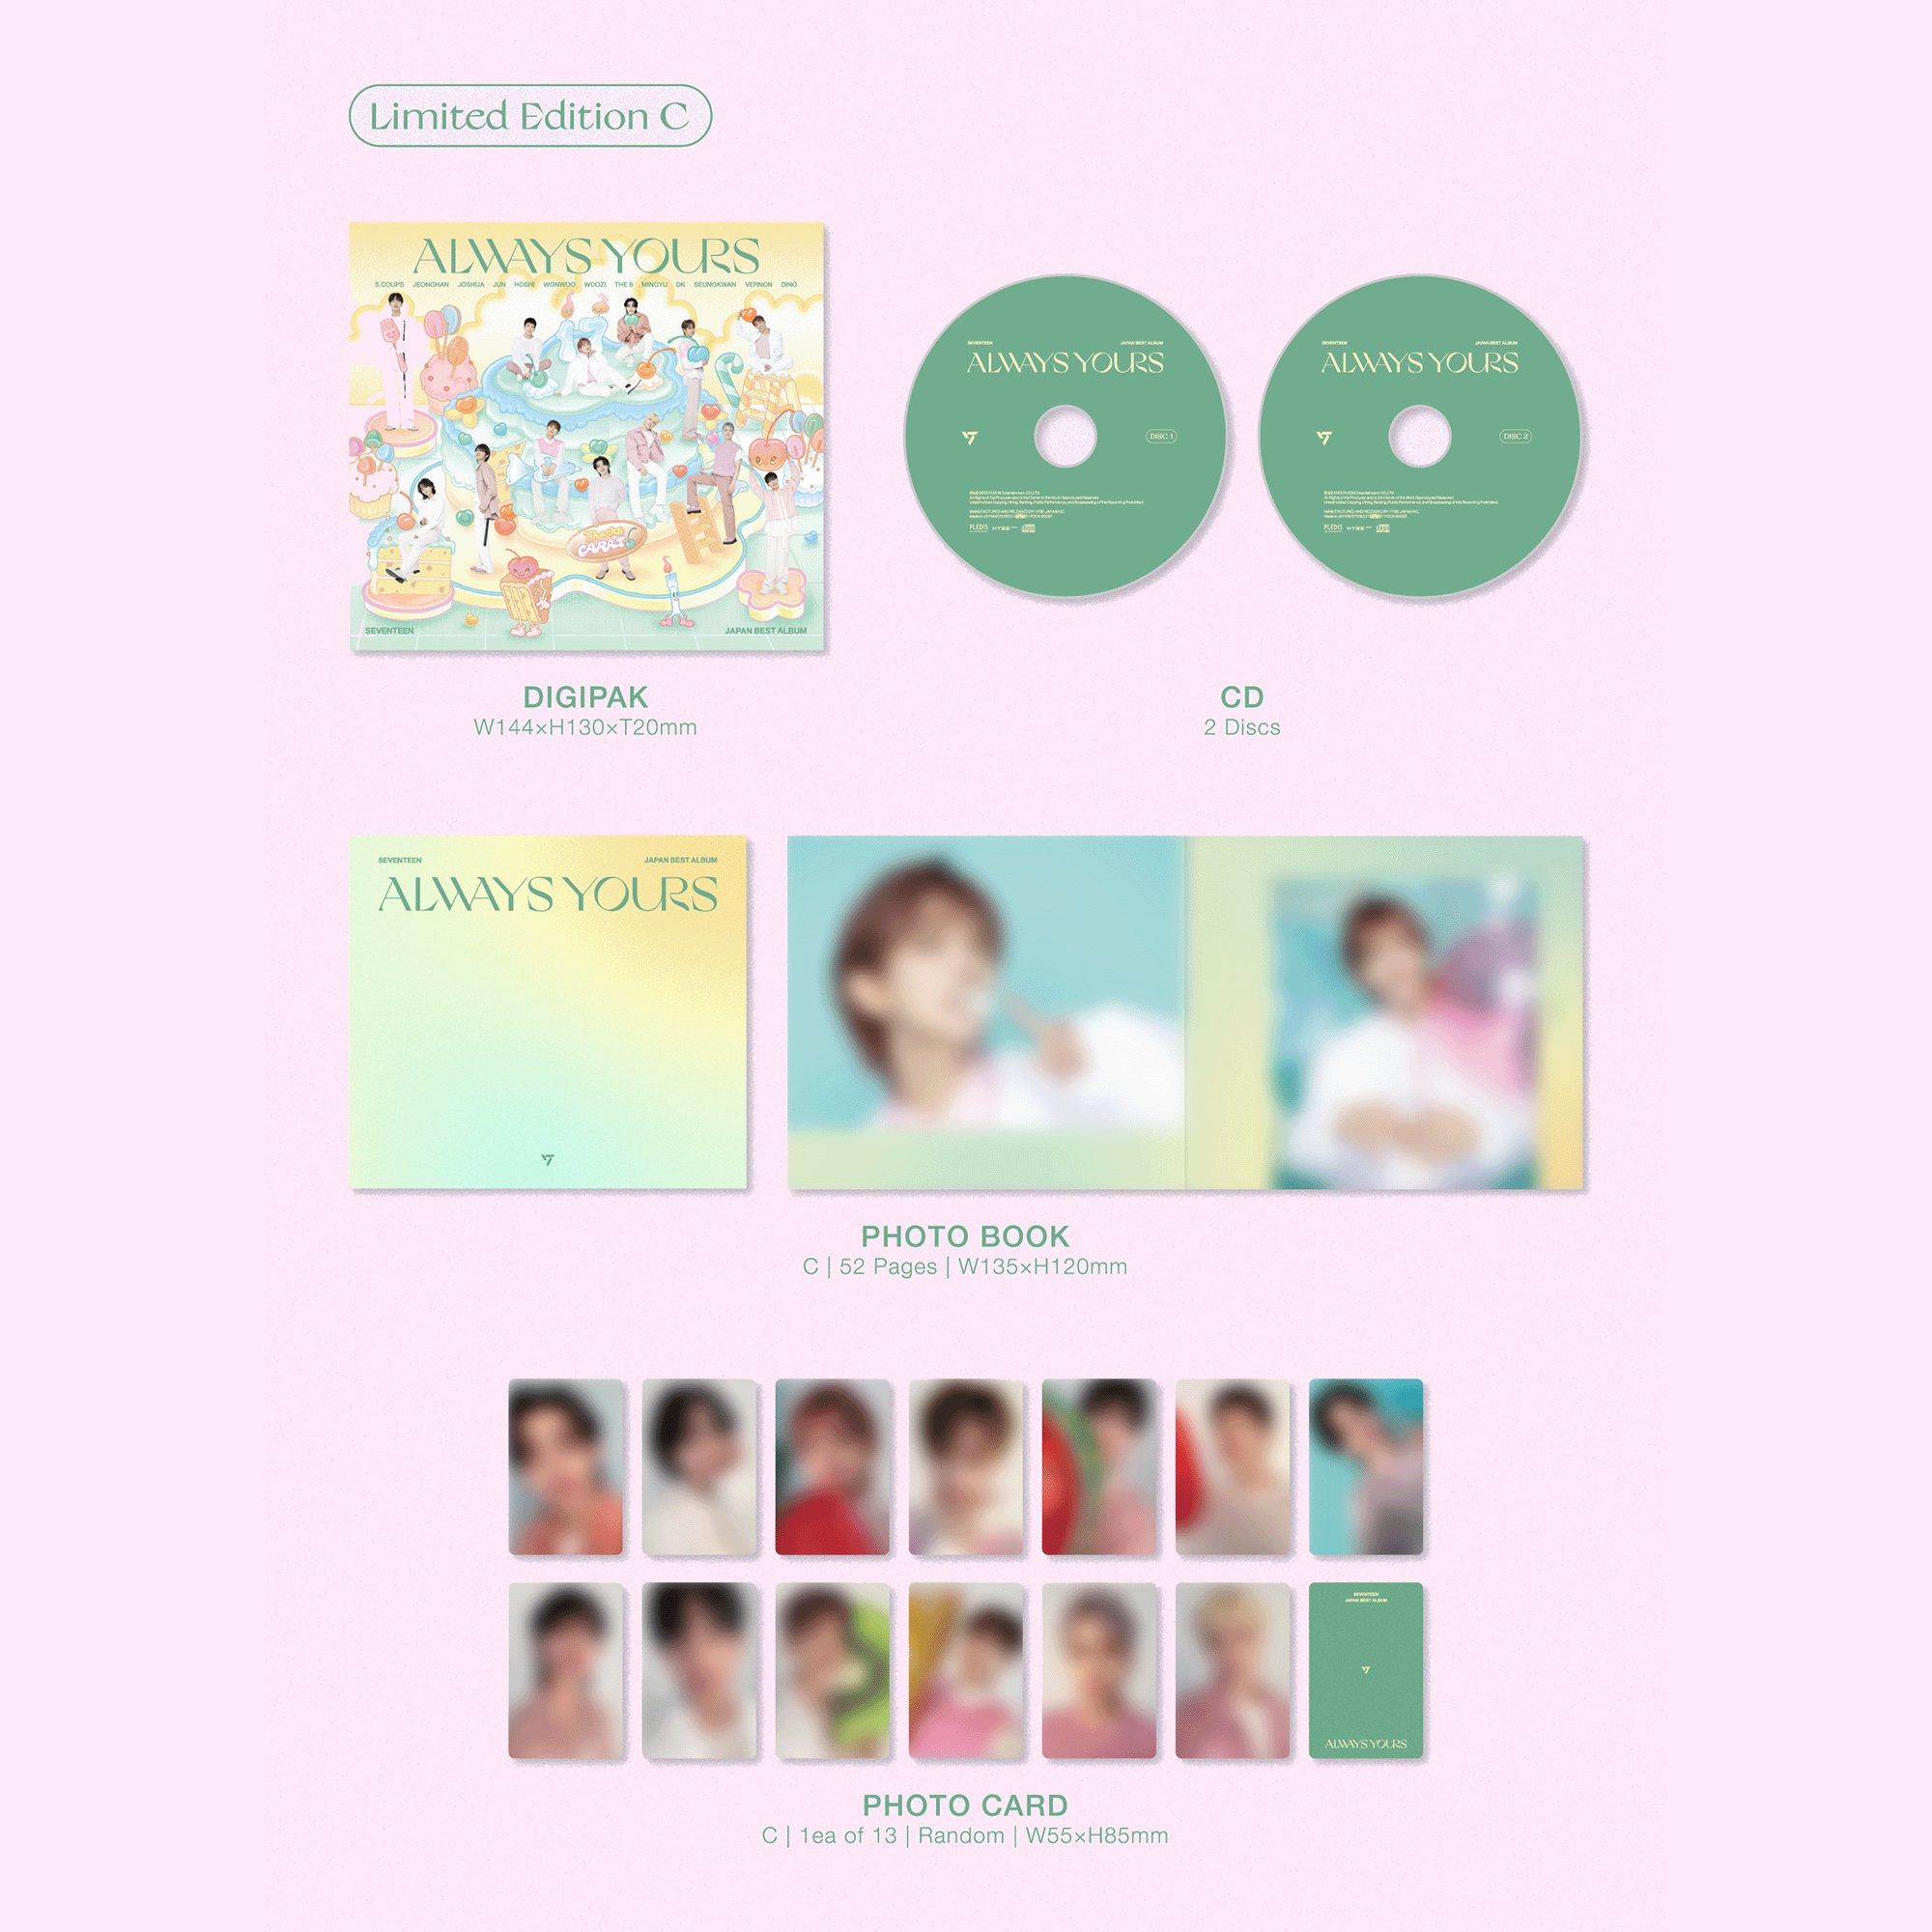 SEVENTEEN - Always Yours: 2CD + Photobook (Limited Edition C